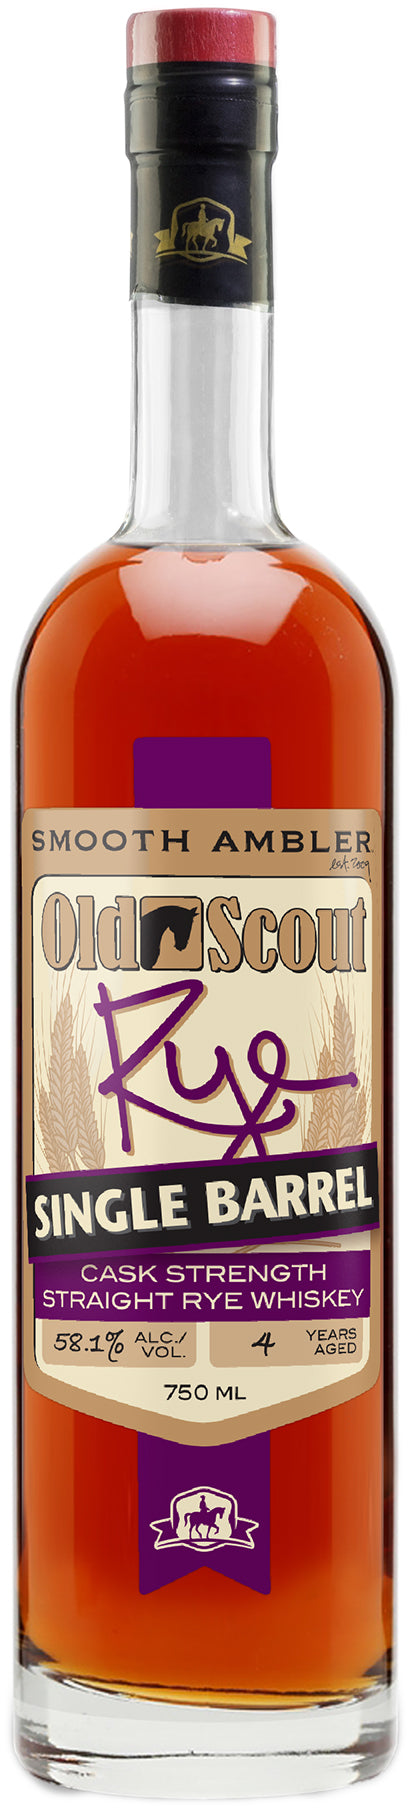 Smooth Ambler Old Scout Cask Strength Straight Rye 113.6 Proof Whiskey